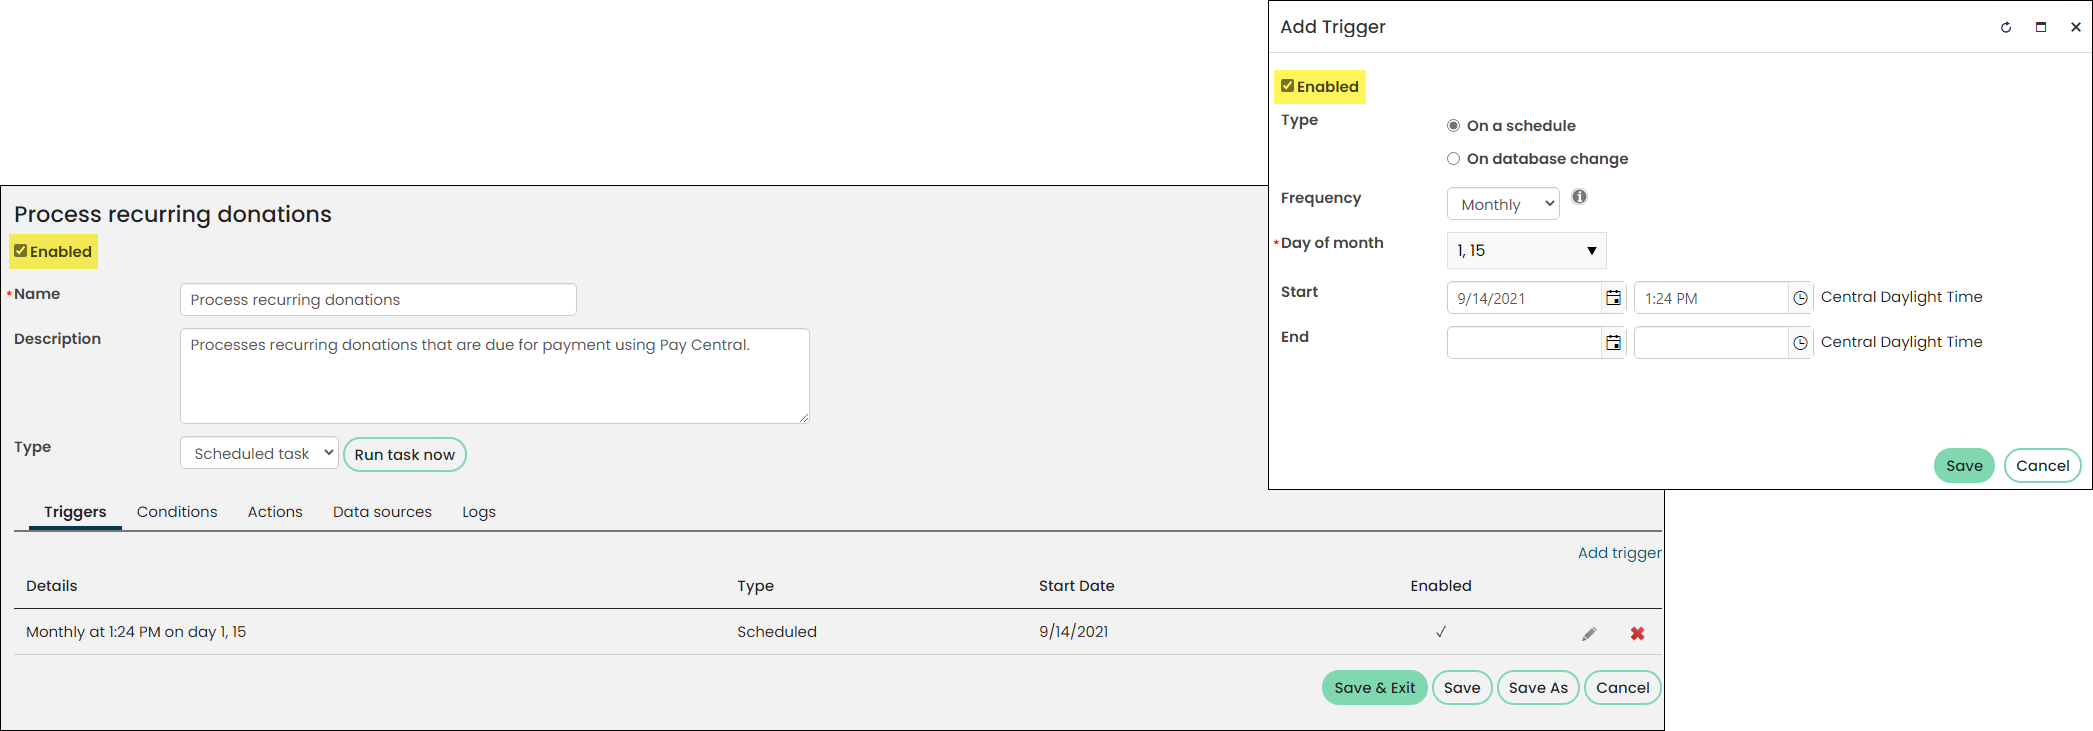 Enabling the Process recurring donations task and monthly trigger